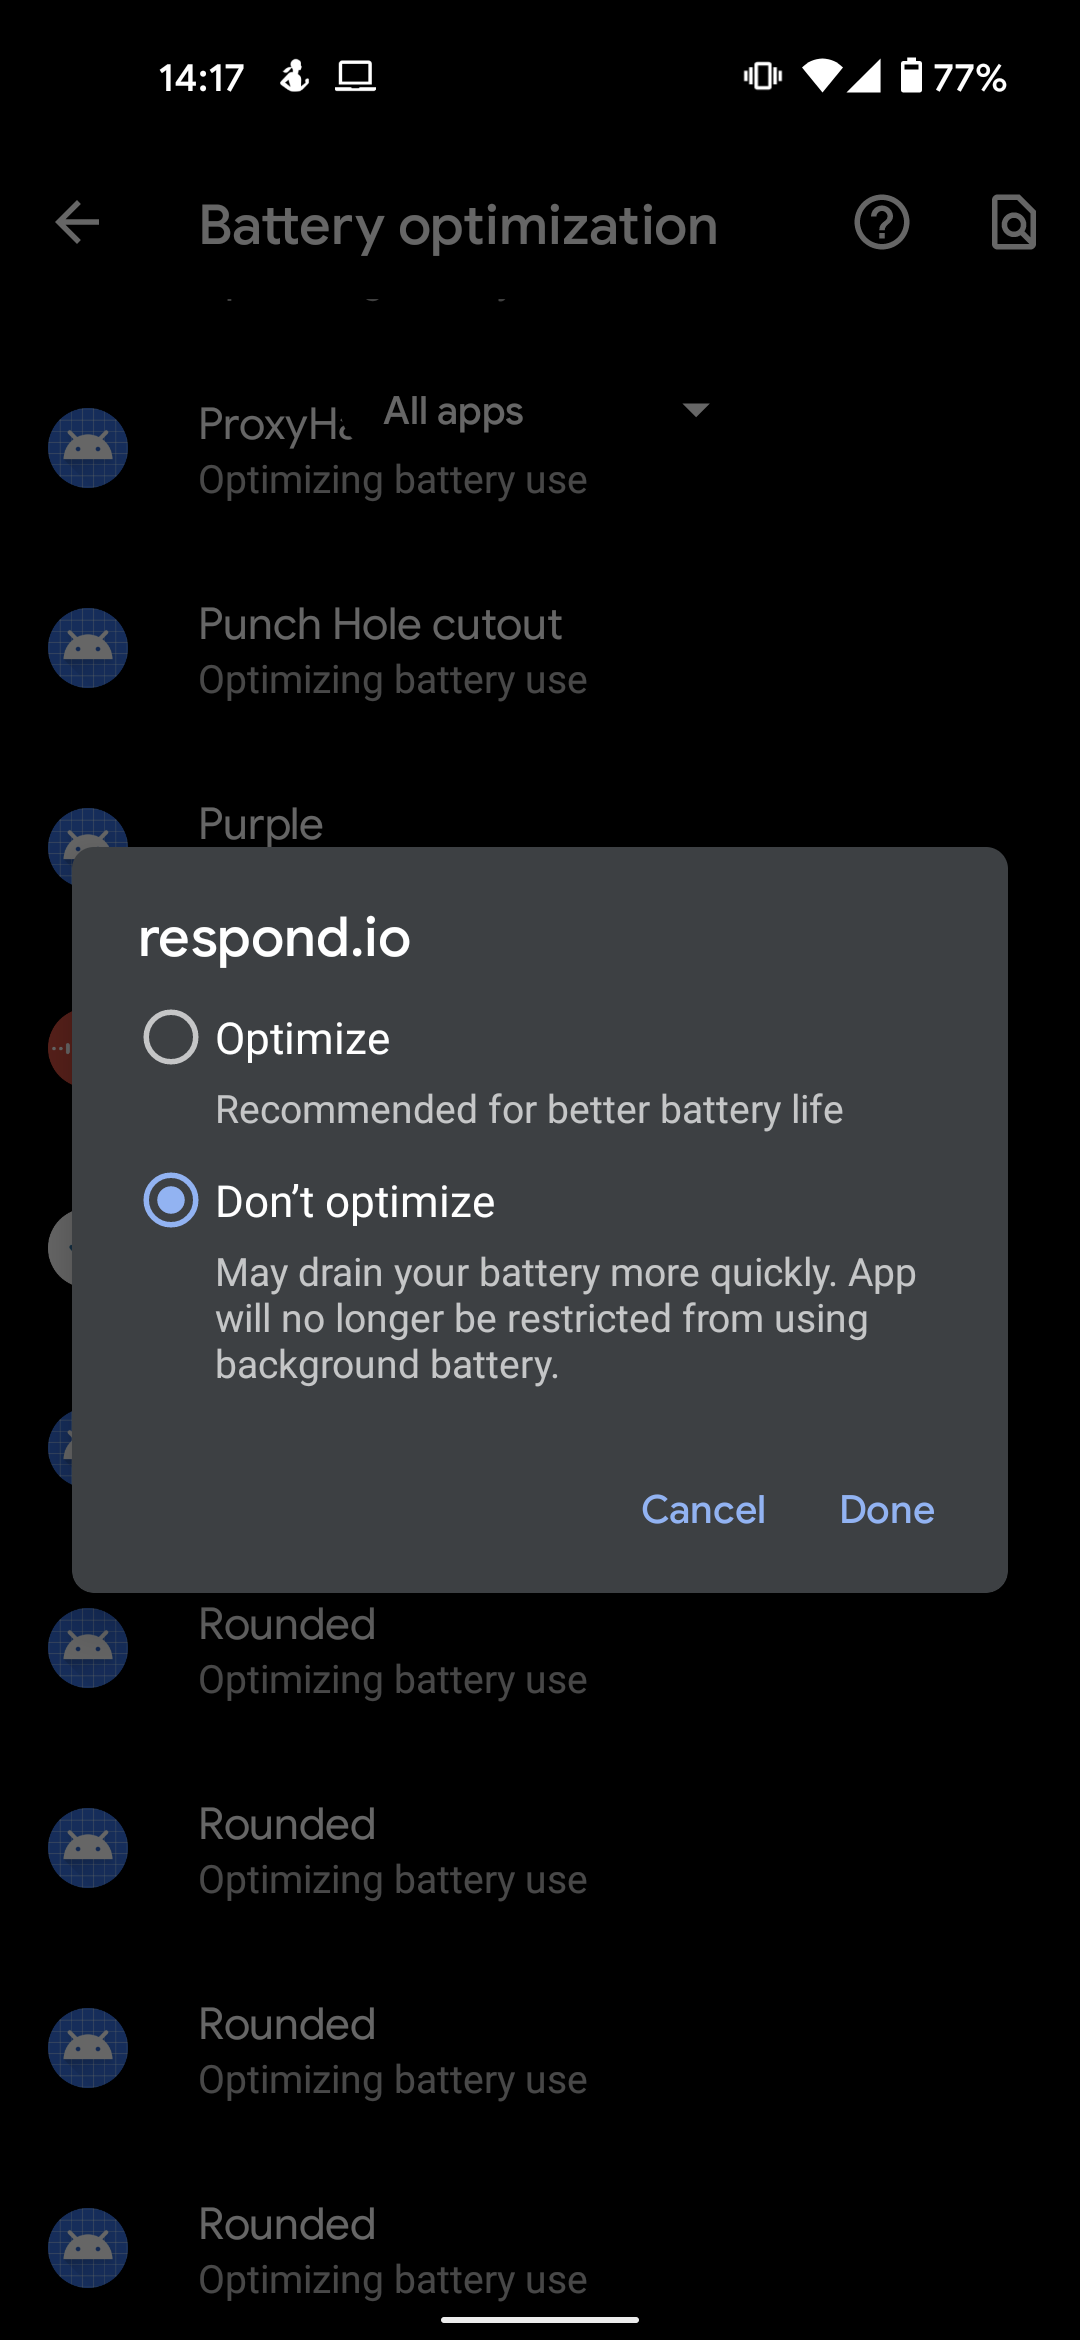 Troubleshoot - Android Battery Optimization Is Enabled For respond.io App